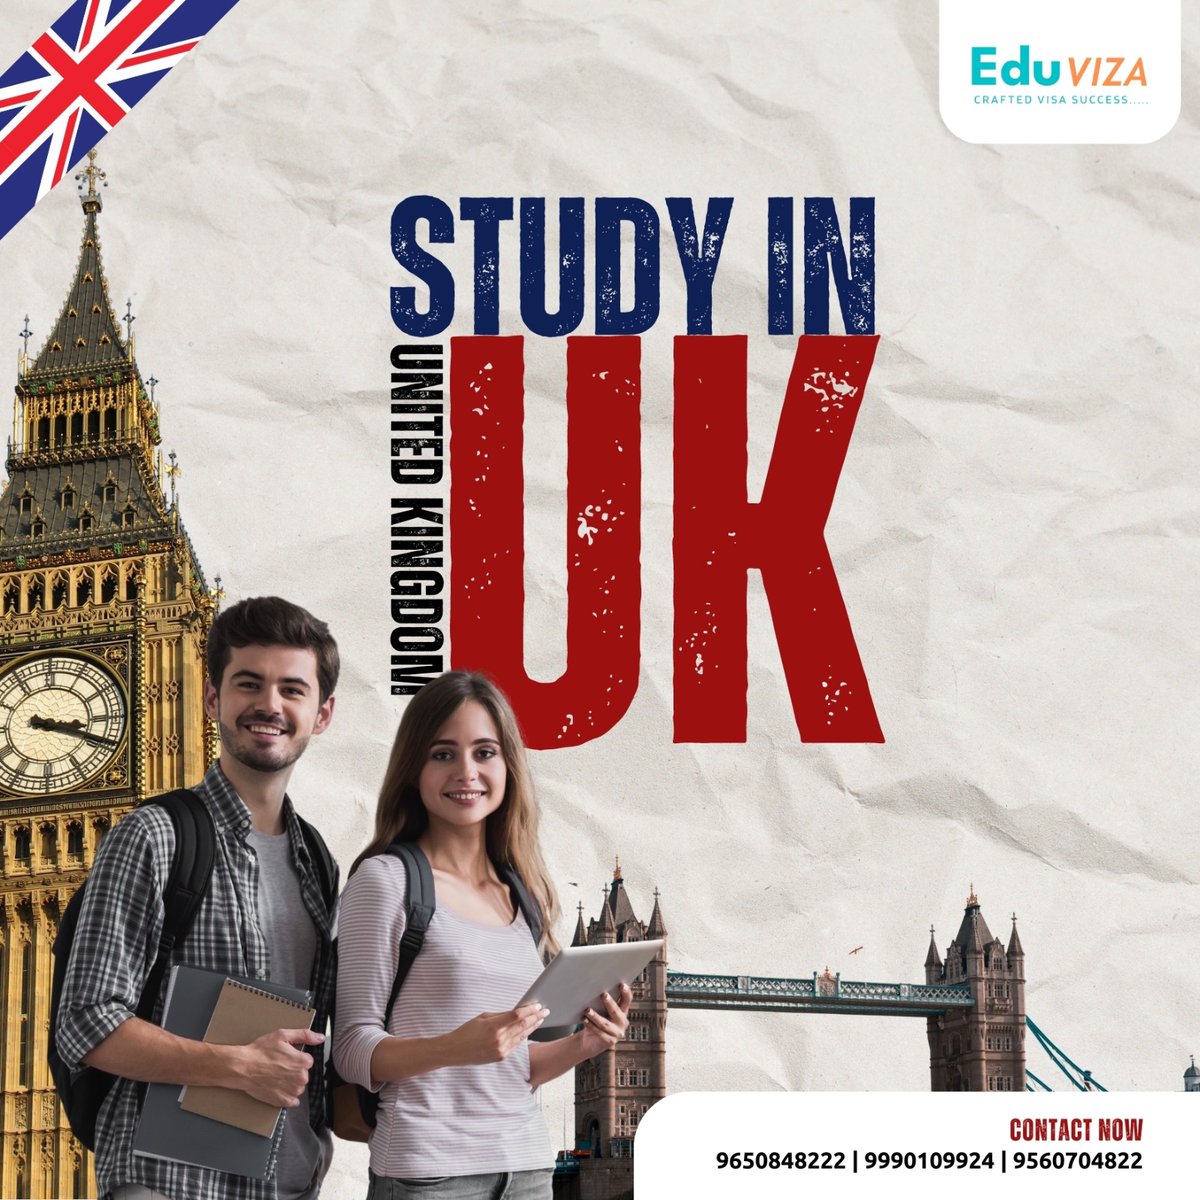 Ready to take the next step in your #education journey? Take on the challenge of studying in the UK with a study visa!
Let us help you realize them today. ✅#StudyInUK #VisaApplication
Contact us 📲 -9650848222 | 9990109924 | 9560704822
.
.
#studyinuk #studyabroad #studyincanada